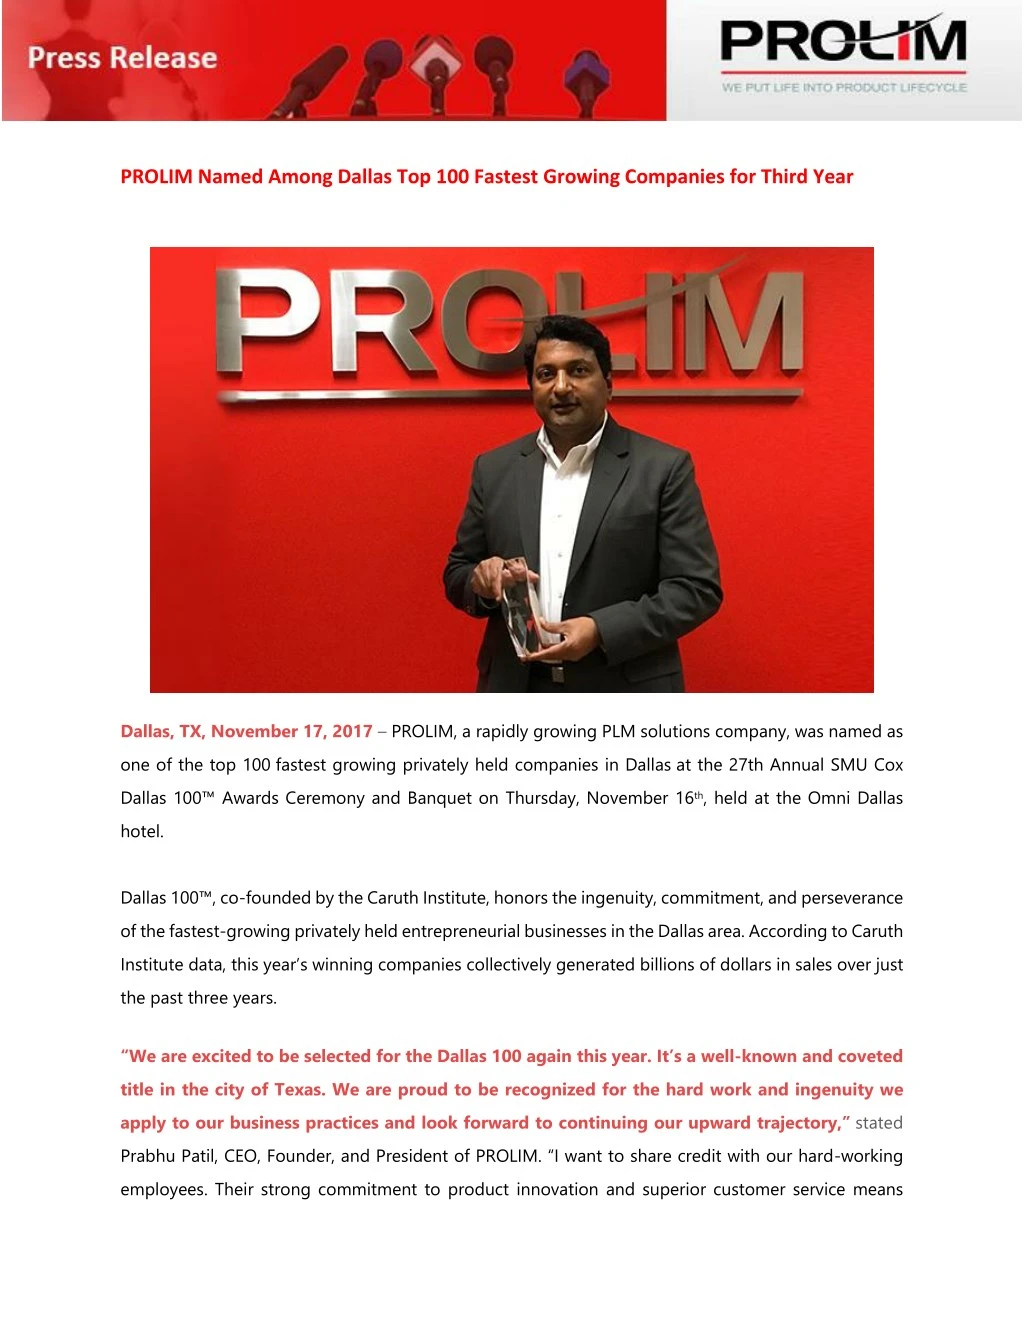 prolim named among dallas top 100 fastest growing